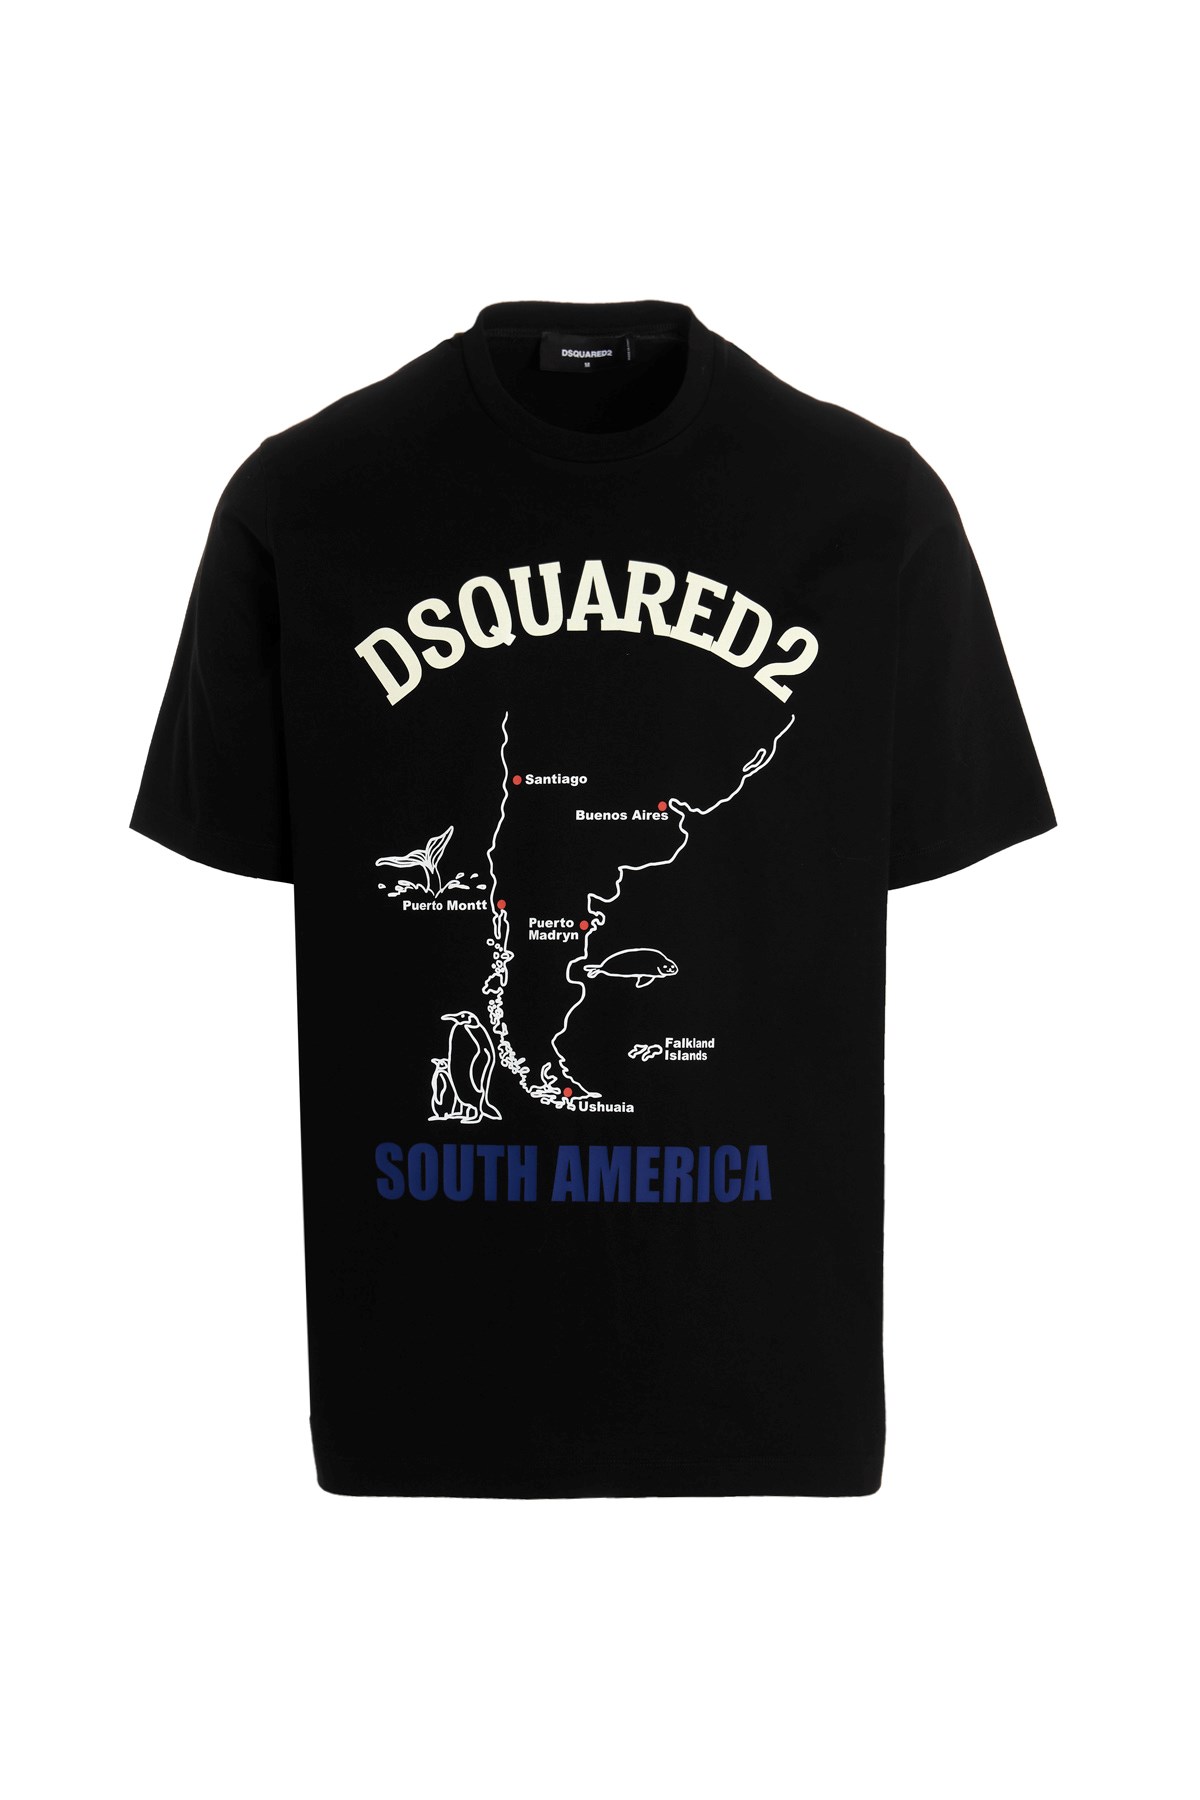 DSQUARED2 T-Shirt 'South America'